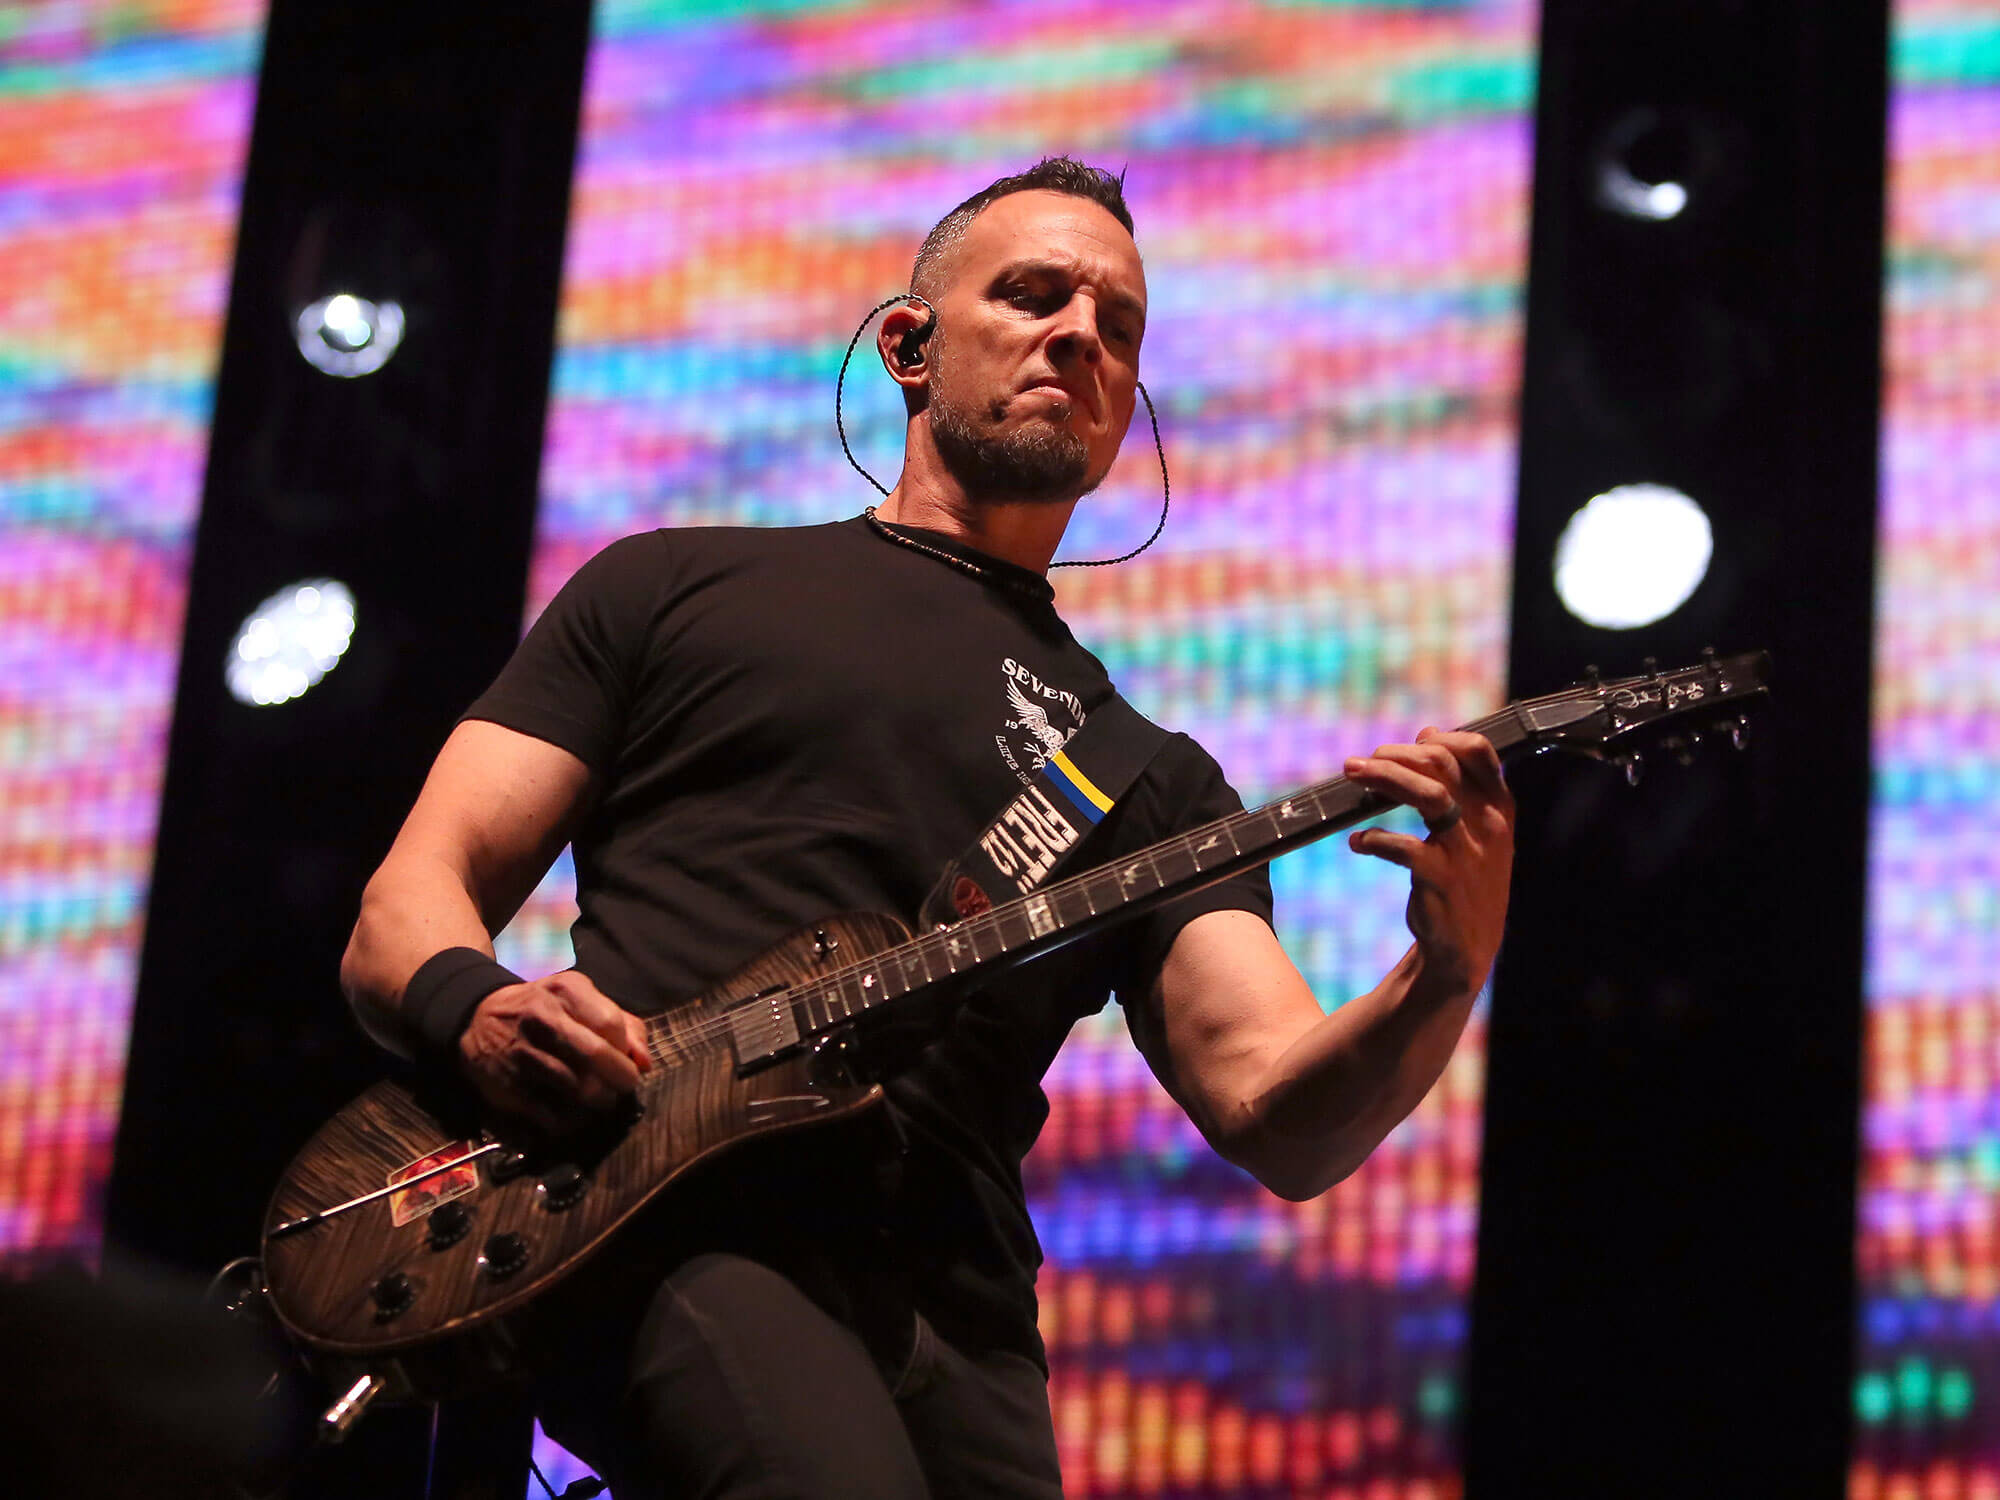 Mark Tremonti performing live